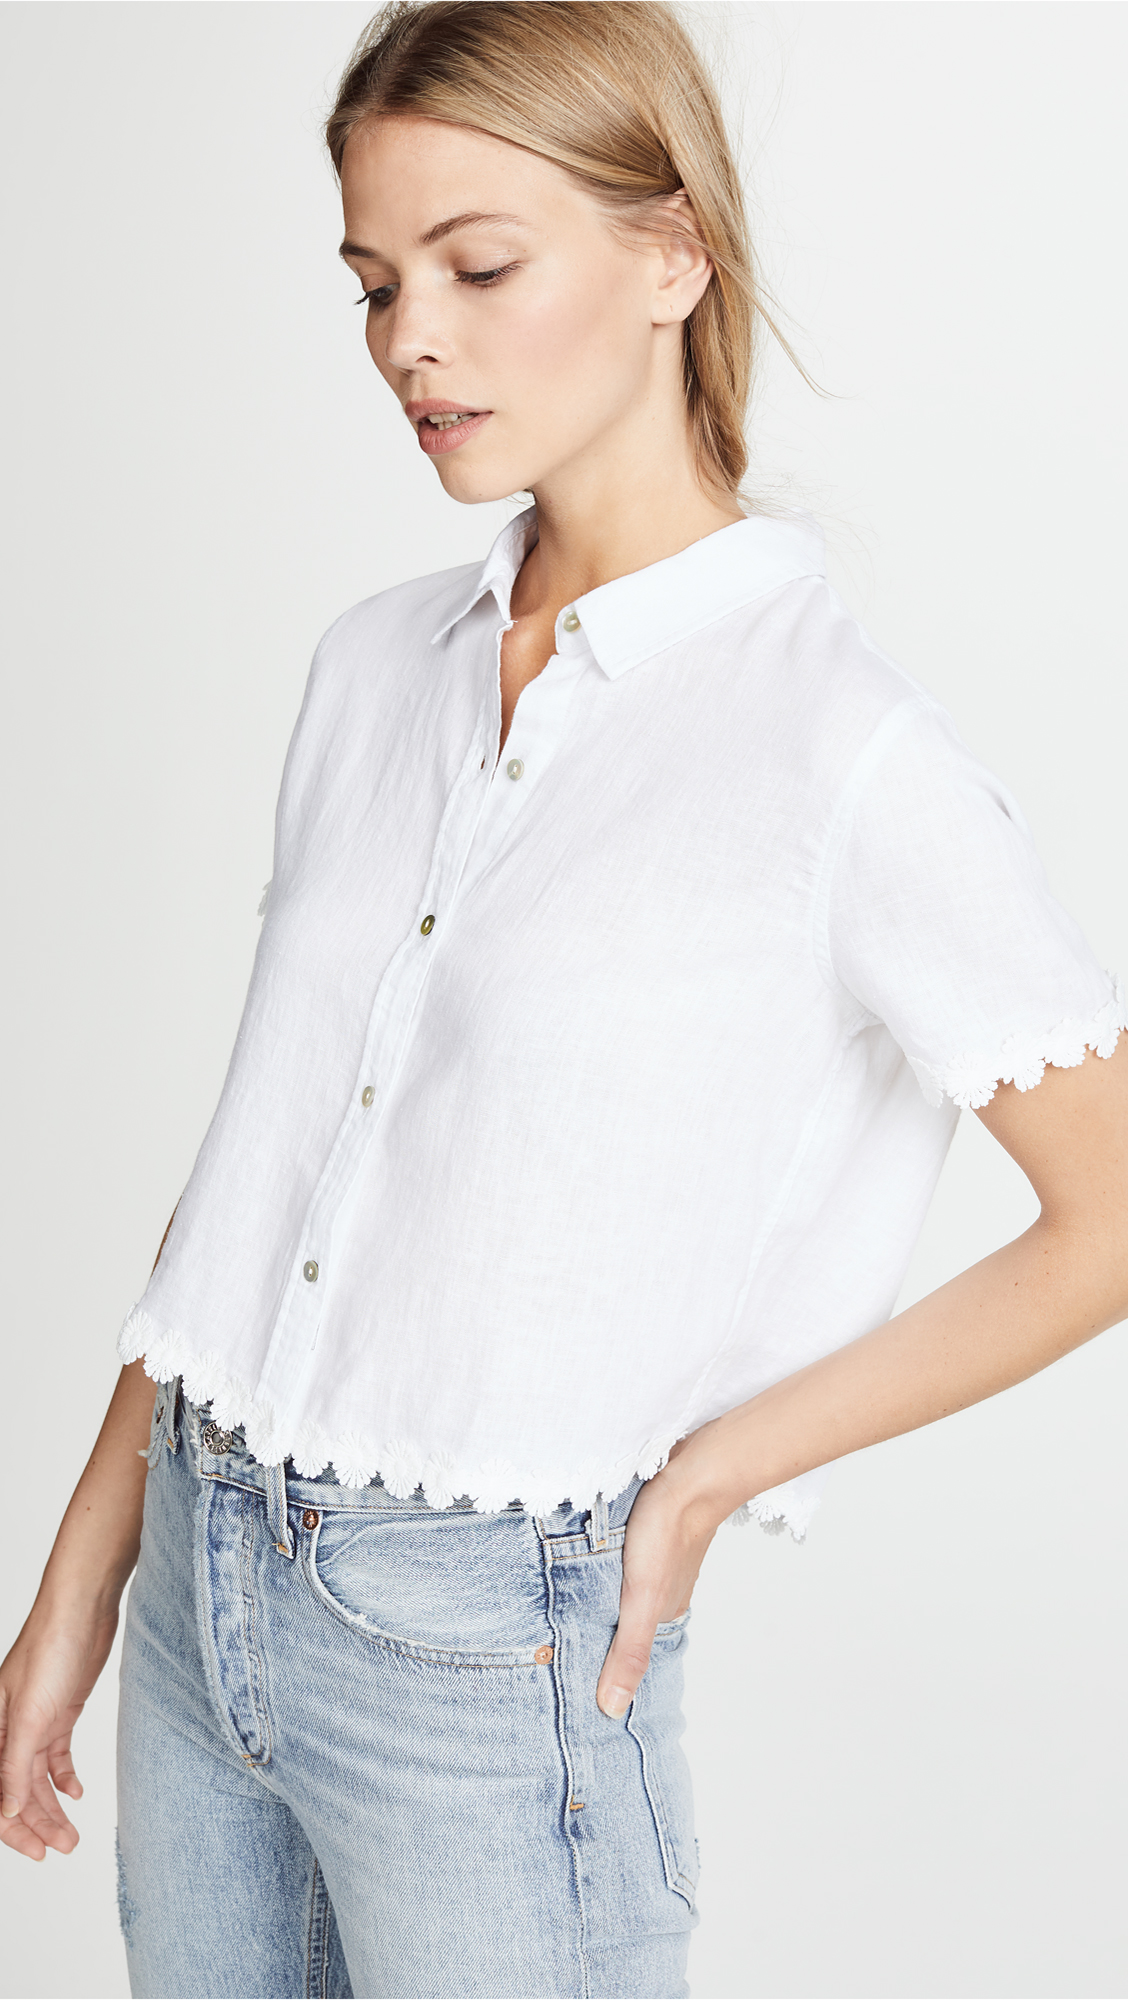 White Short-Sleeve Button Down Shirt with Scalloped Lace Trim